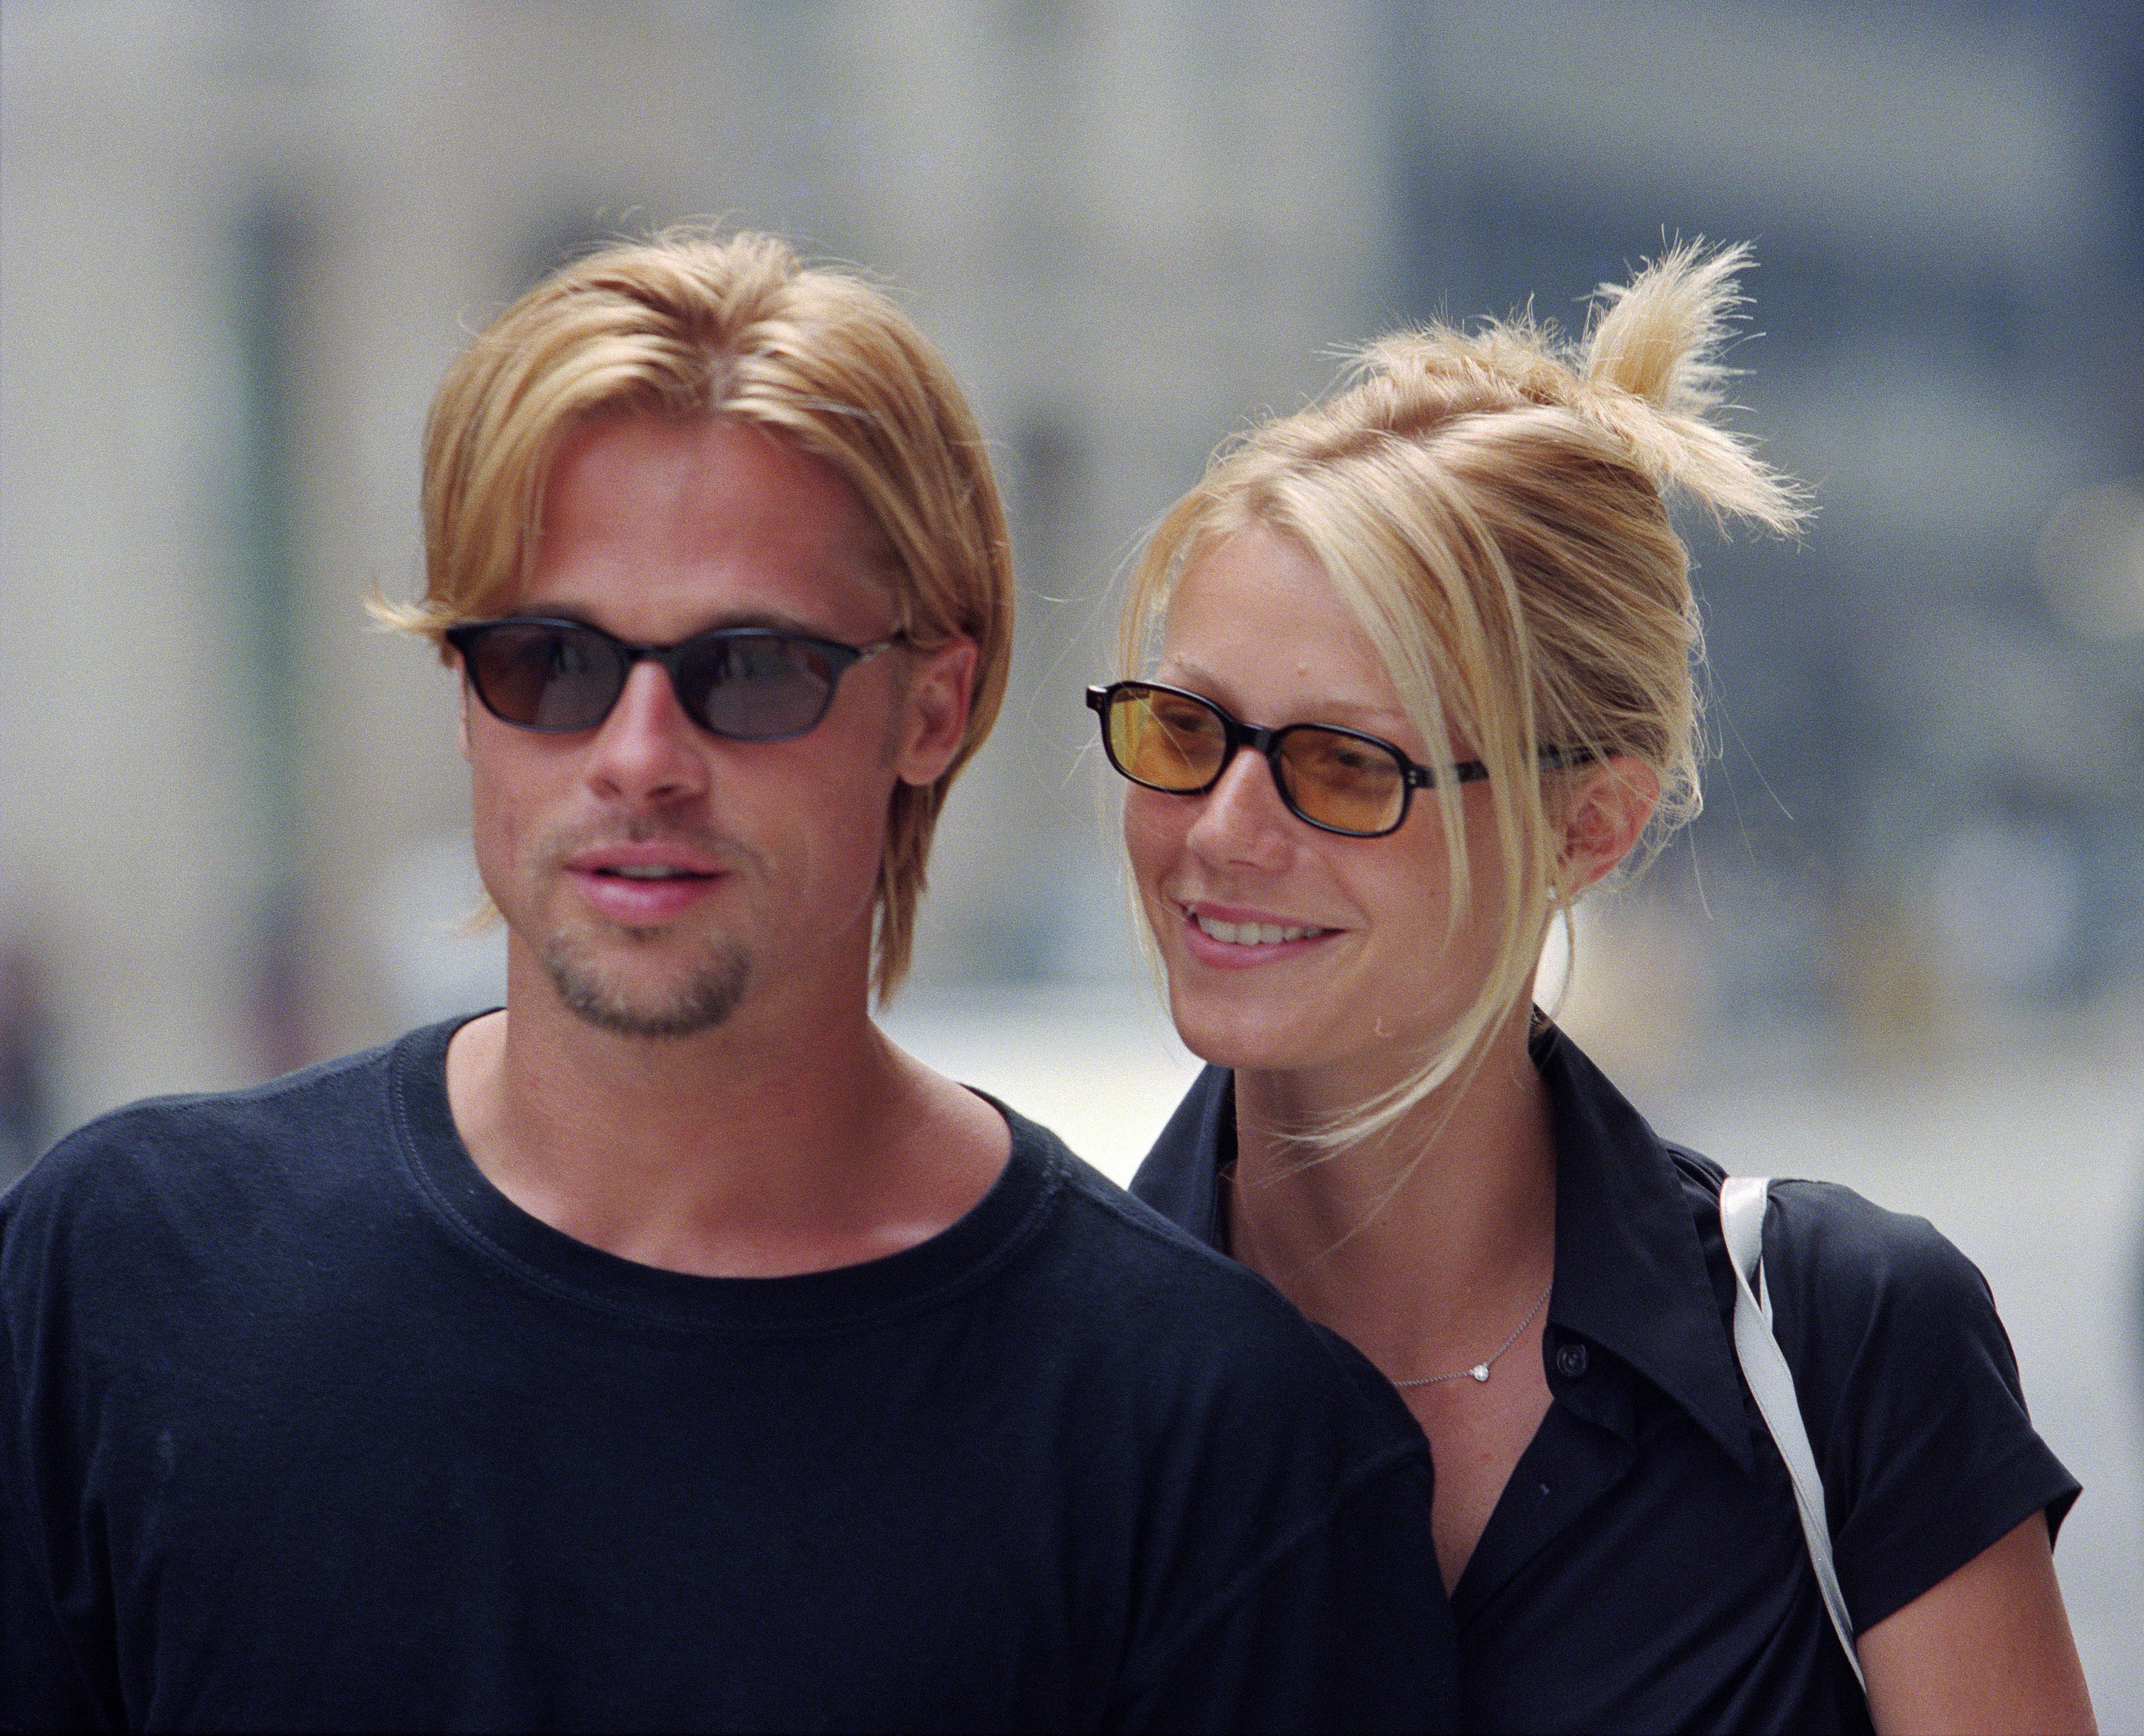 Brad Pitt and Gwyneth Paltrow rocking blond hair in 1996, New York City. | Photo: Getty Images